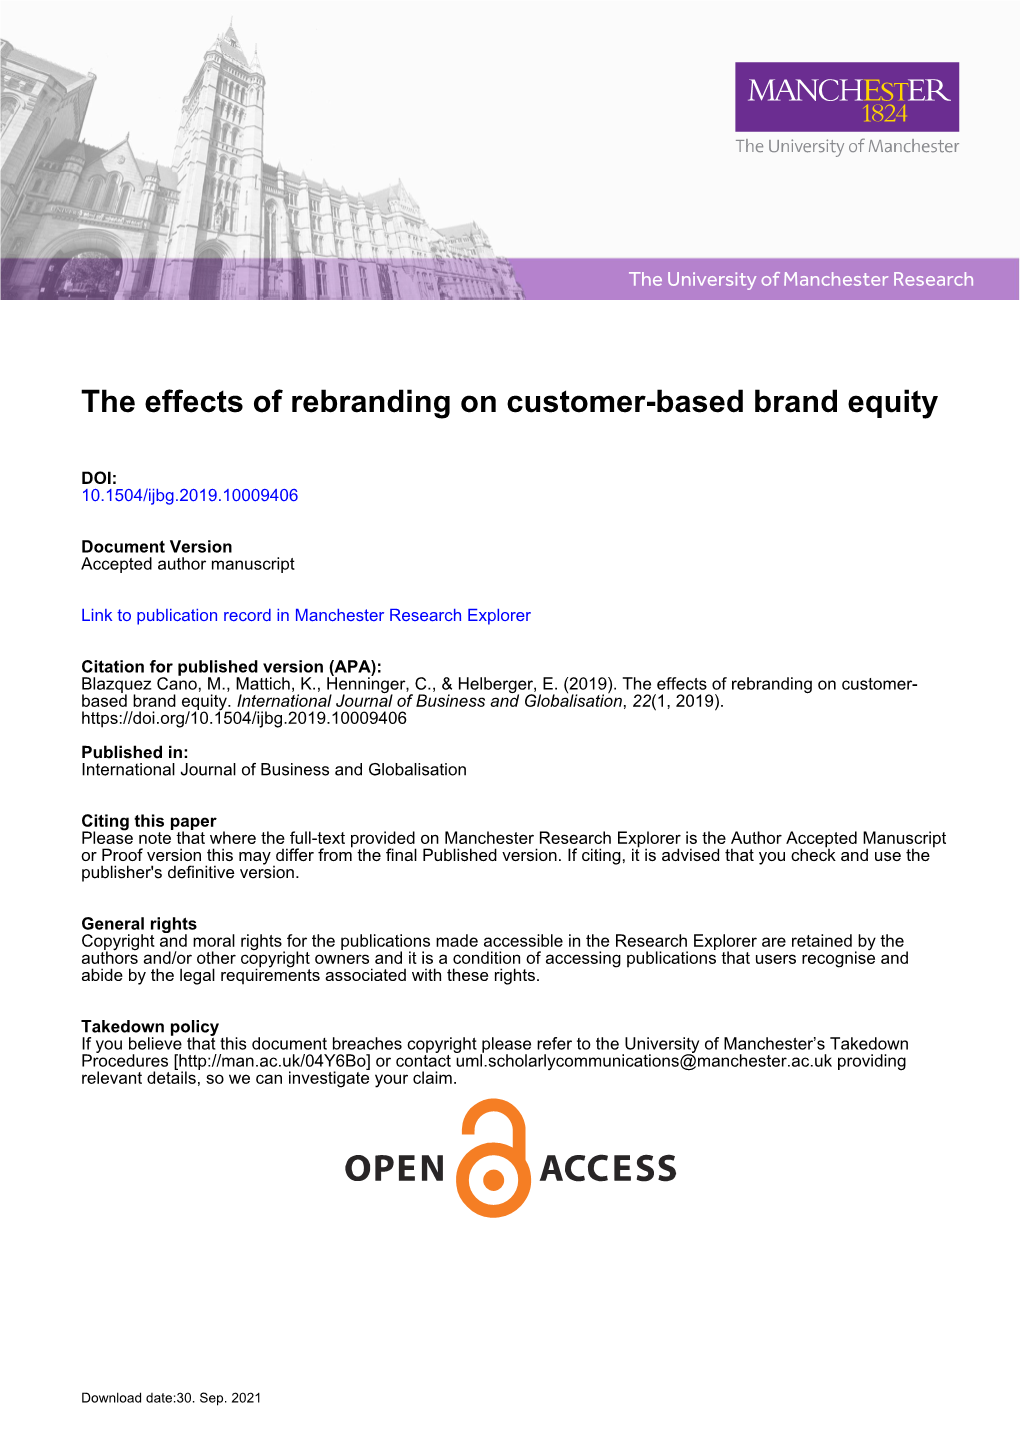 The Effects of Rebranding on Customer-Based Brand Equity